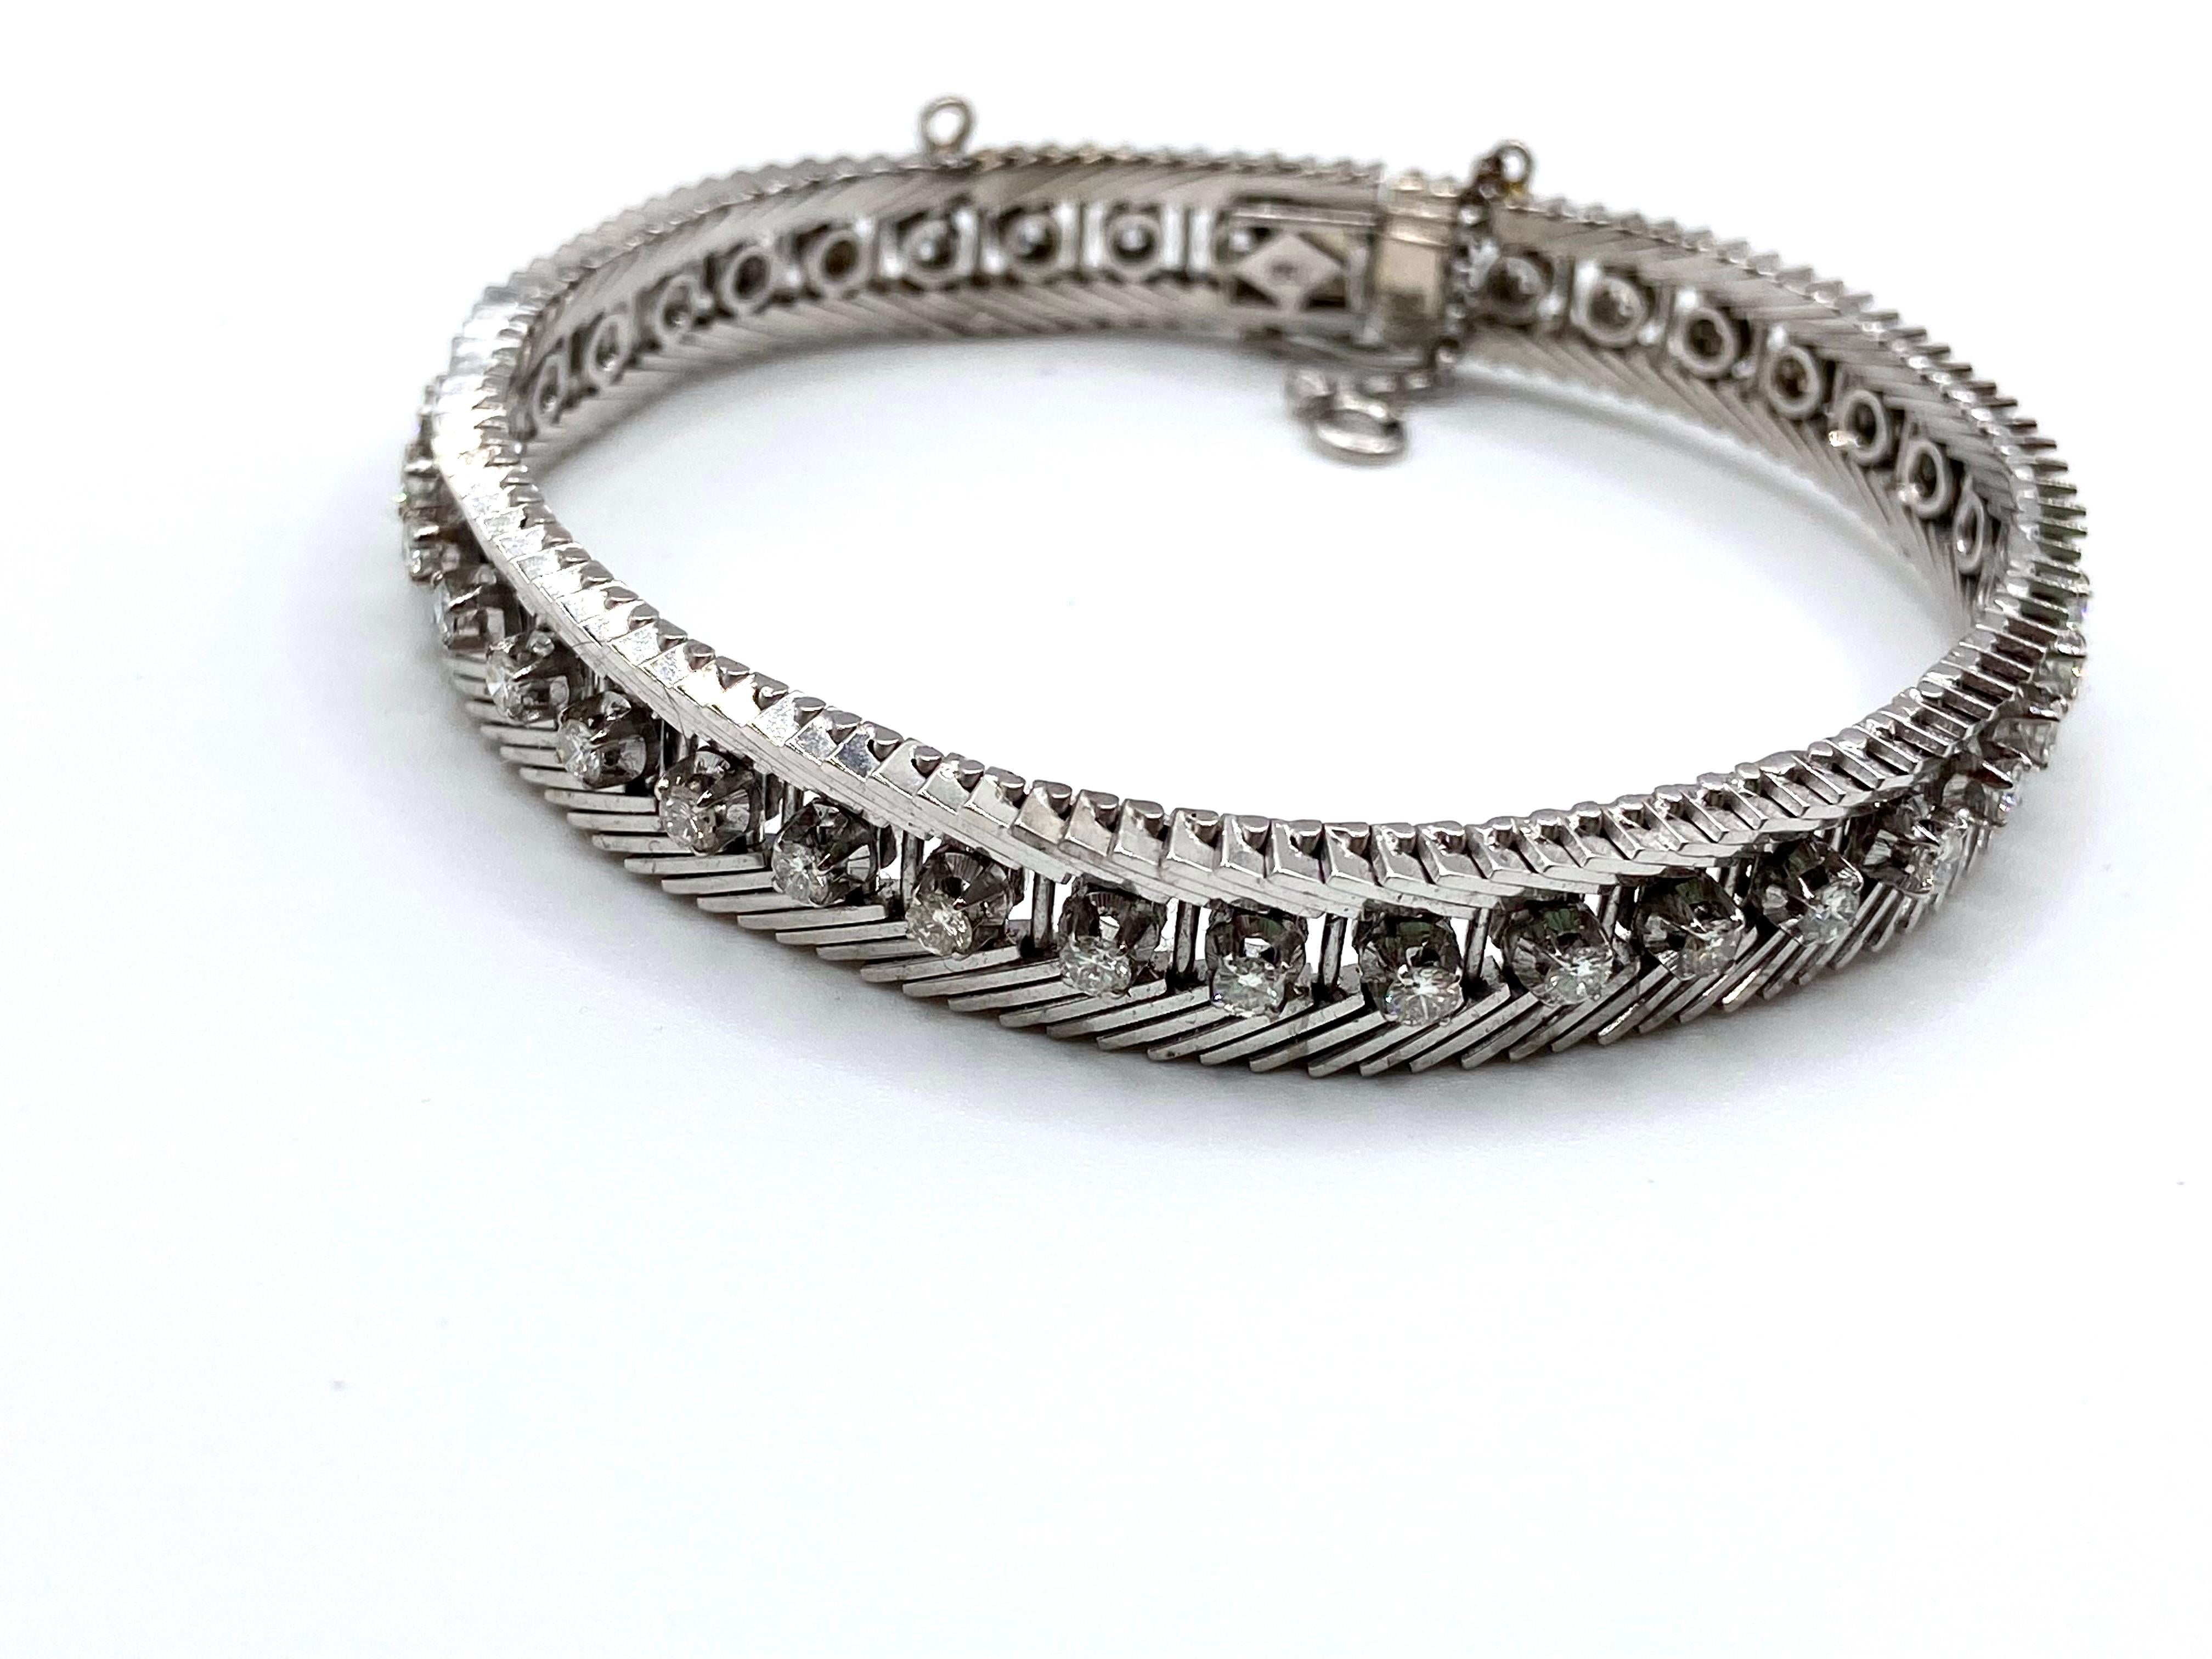 Vintage Bracelet, 1950s. 18 kt white gold and brilliant cut diamonds.
This bracelet is almost 75 years old, it belonged to a Sicilian noblewoman and has a process that has now disappeared. All in 18 Kt white gold (title 750 thousandths), set with 38